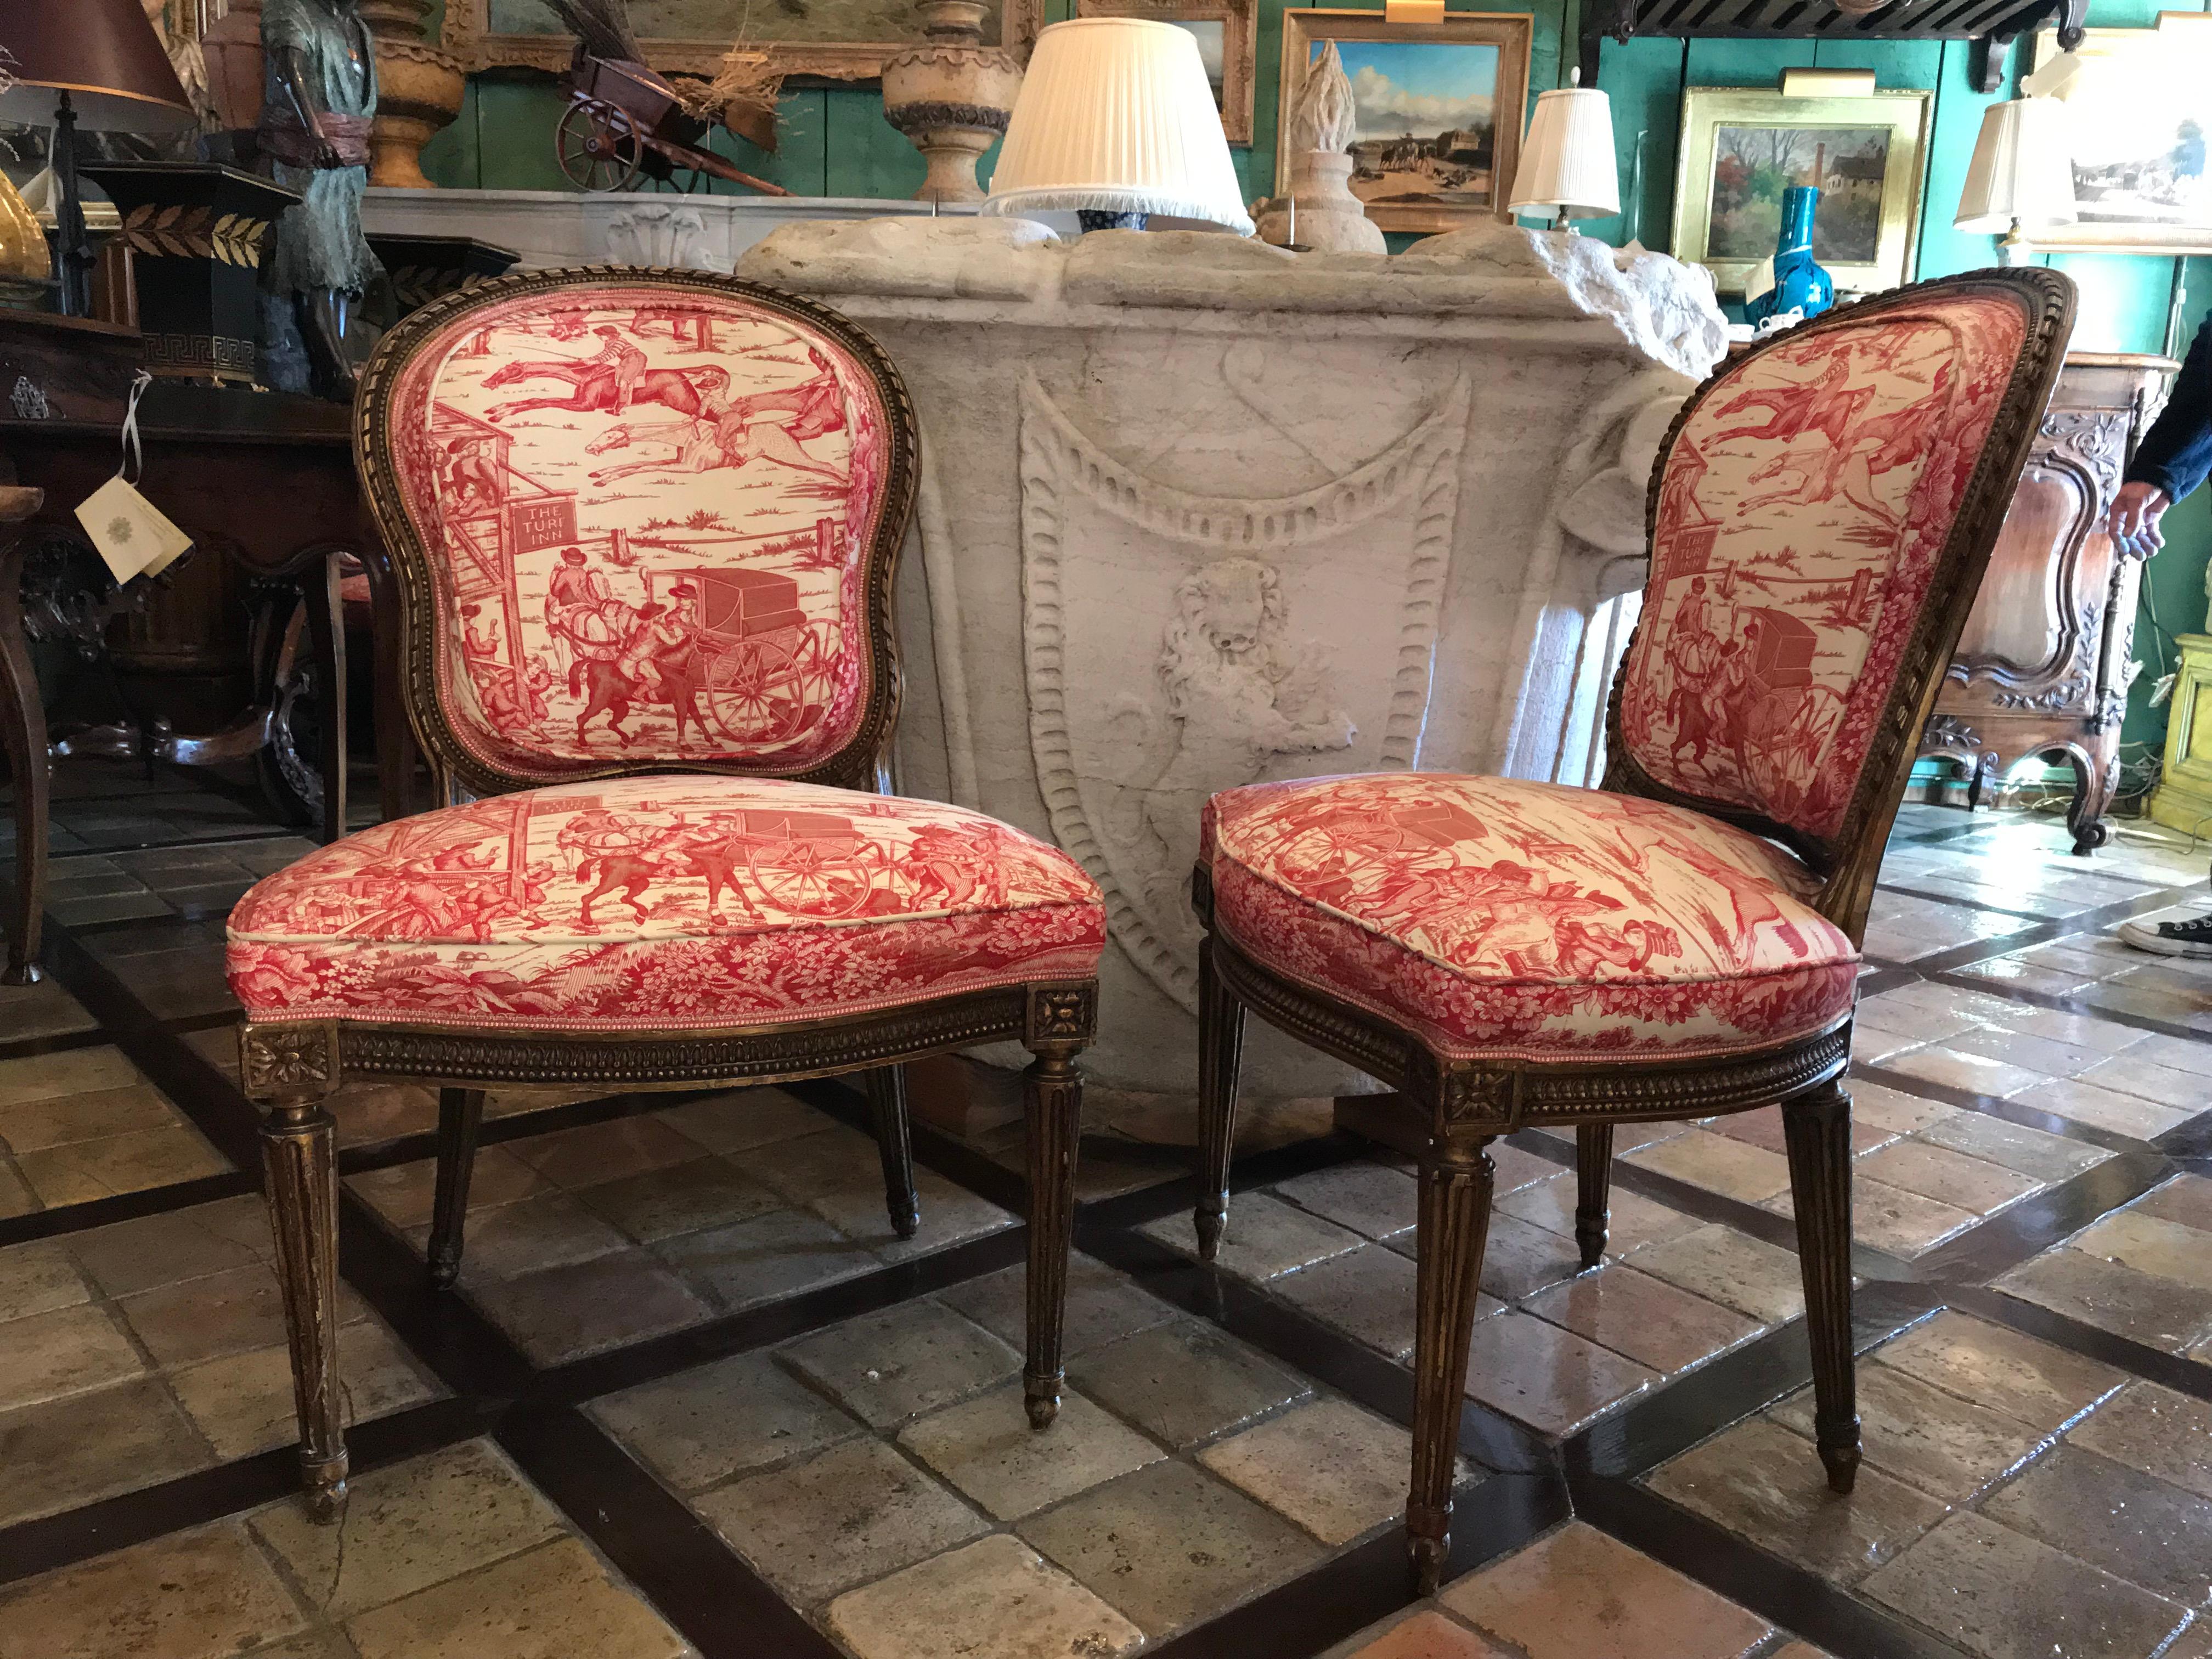 Set of eight 19th century French Chairs.
Of the Louis XVI style gilded dining room chairs with beautiful carving all around the oval back. Upholstered in pink and light cream fabric.
Each chair is raised by fine and uniquely shaped circular fluted